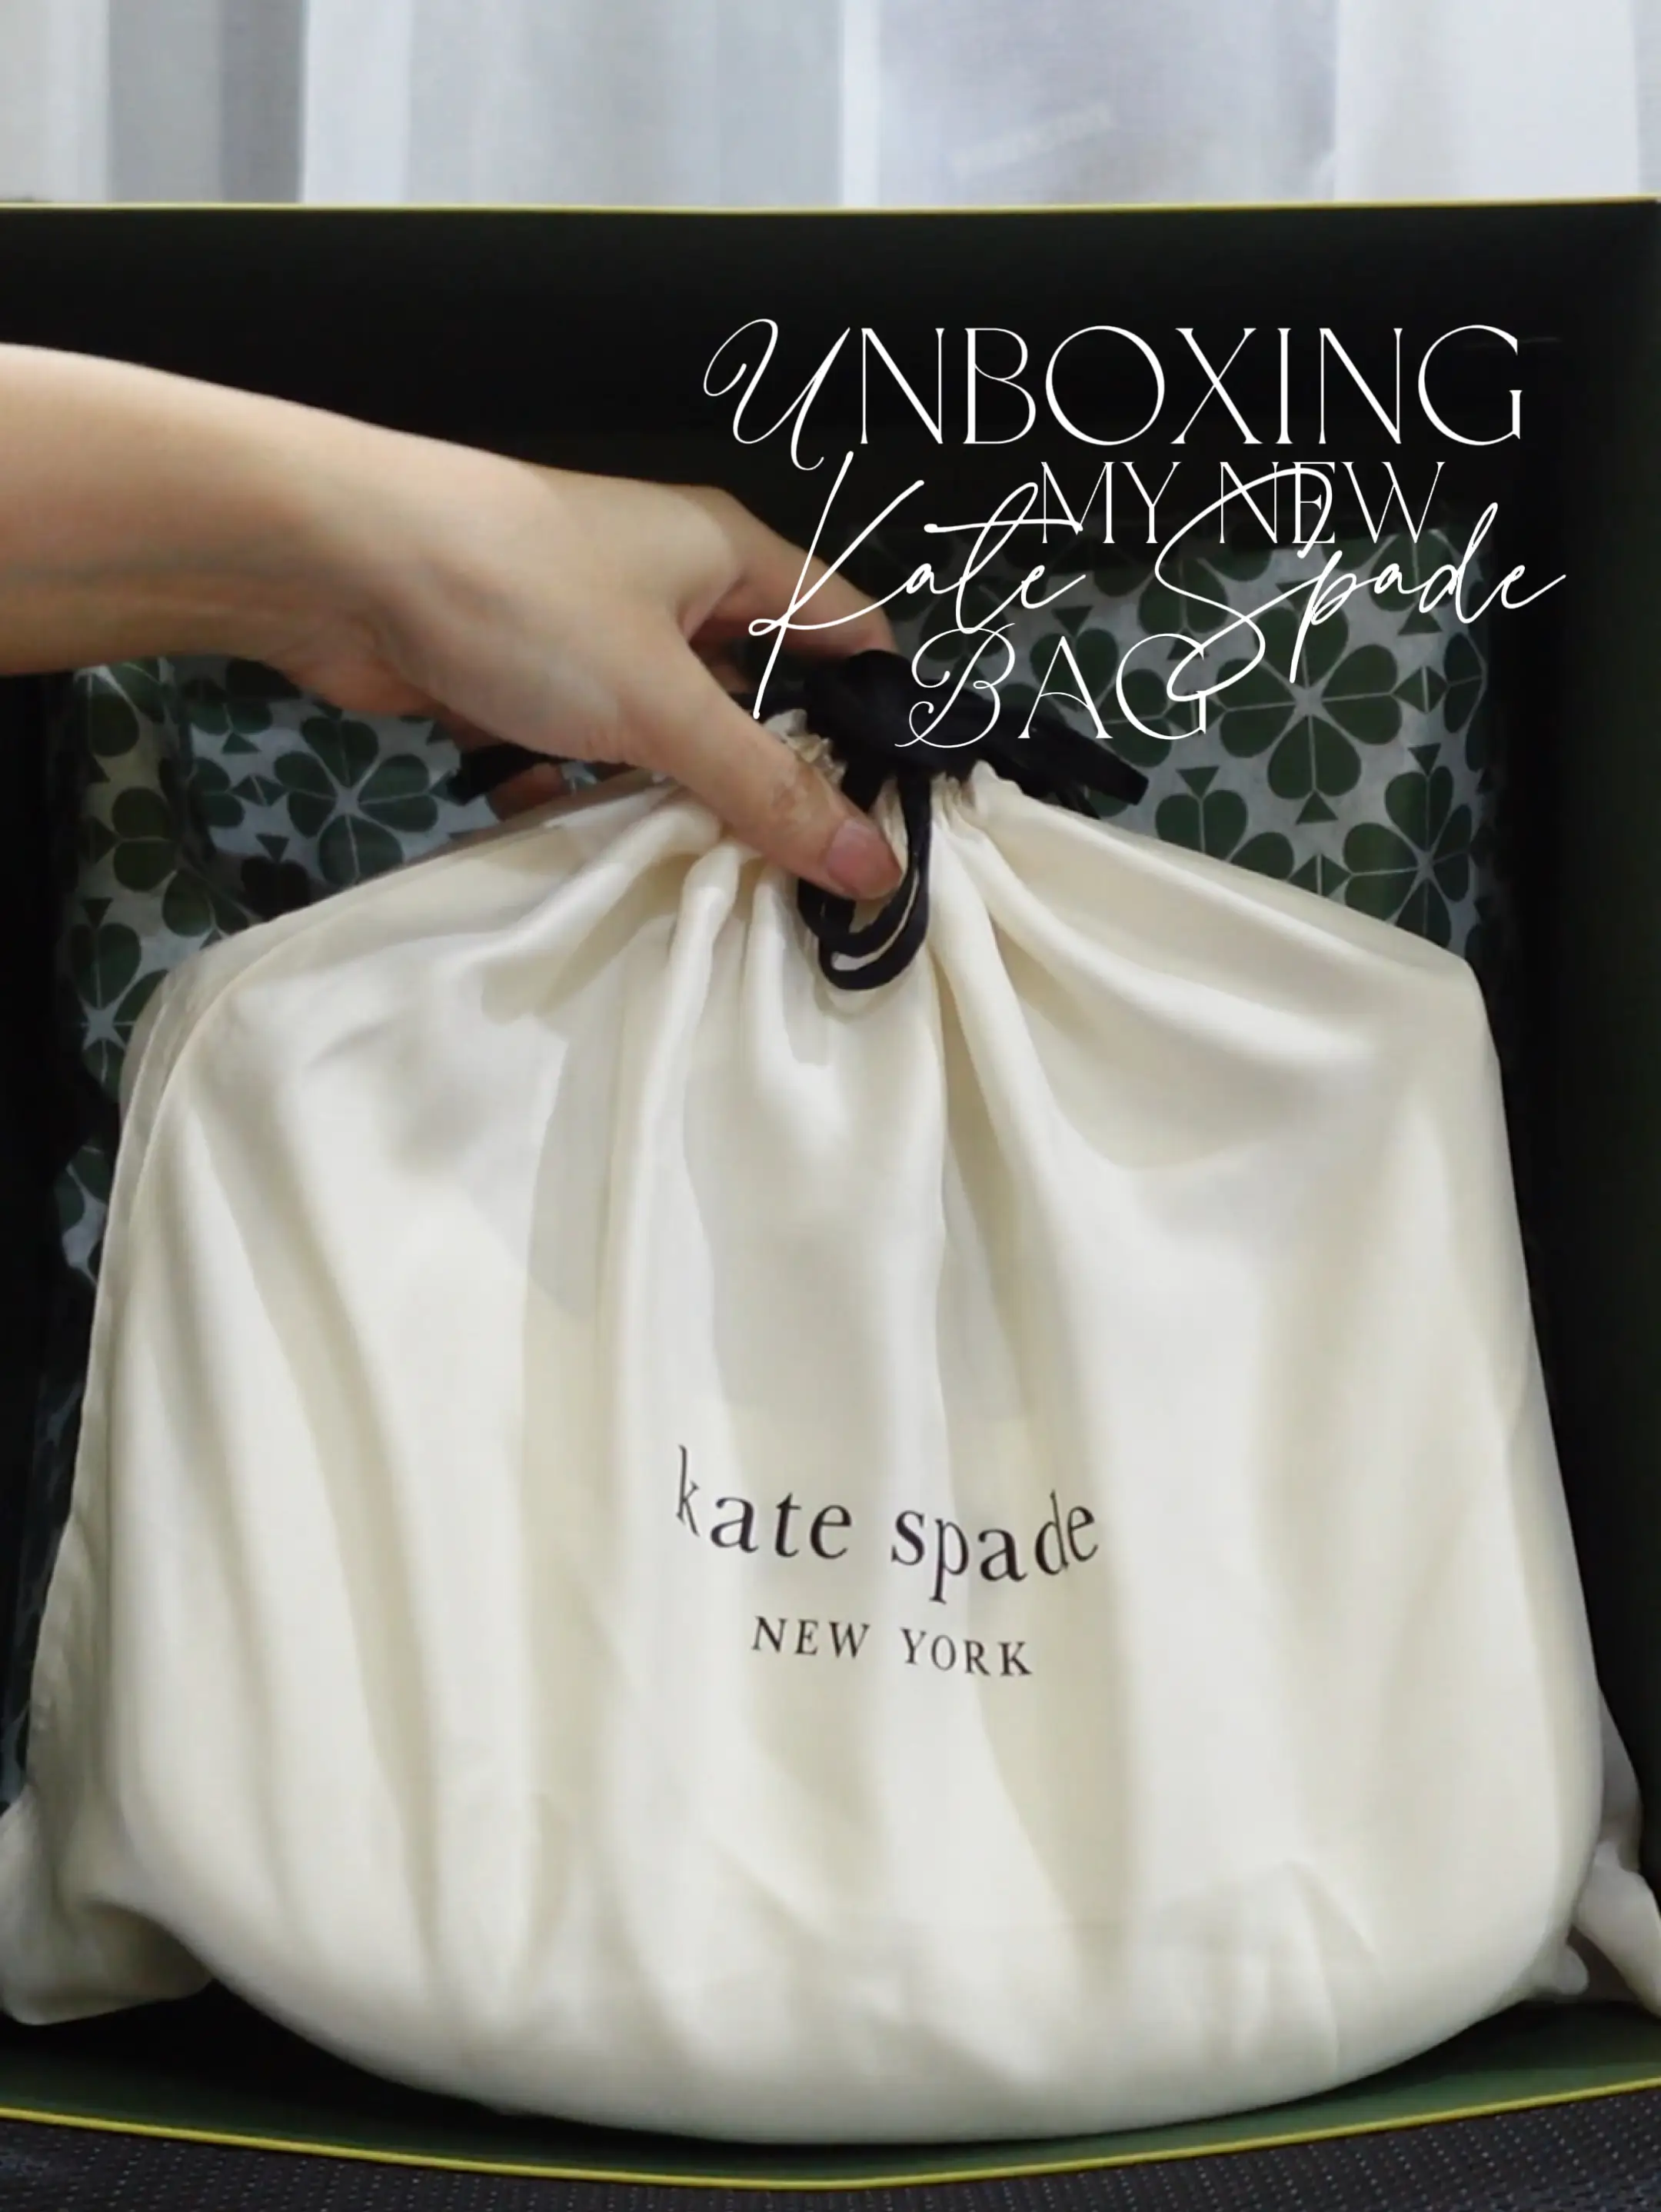 Finally found a minimalist bag which is also versatile. Unboxing and